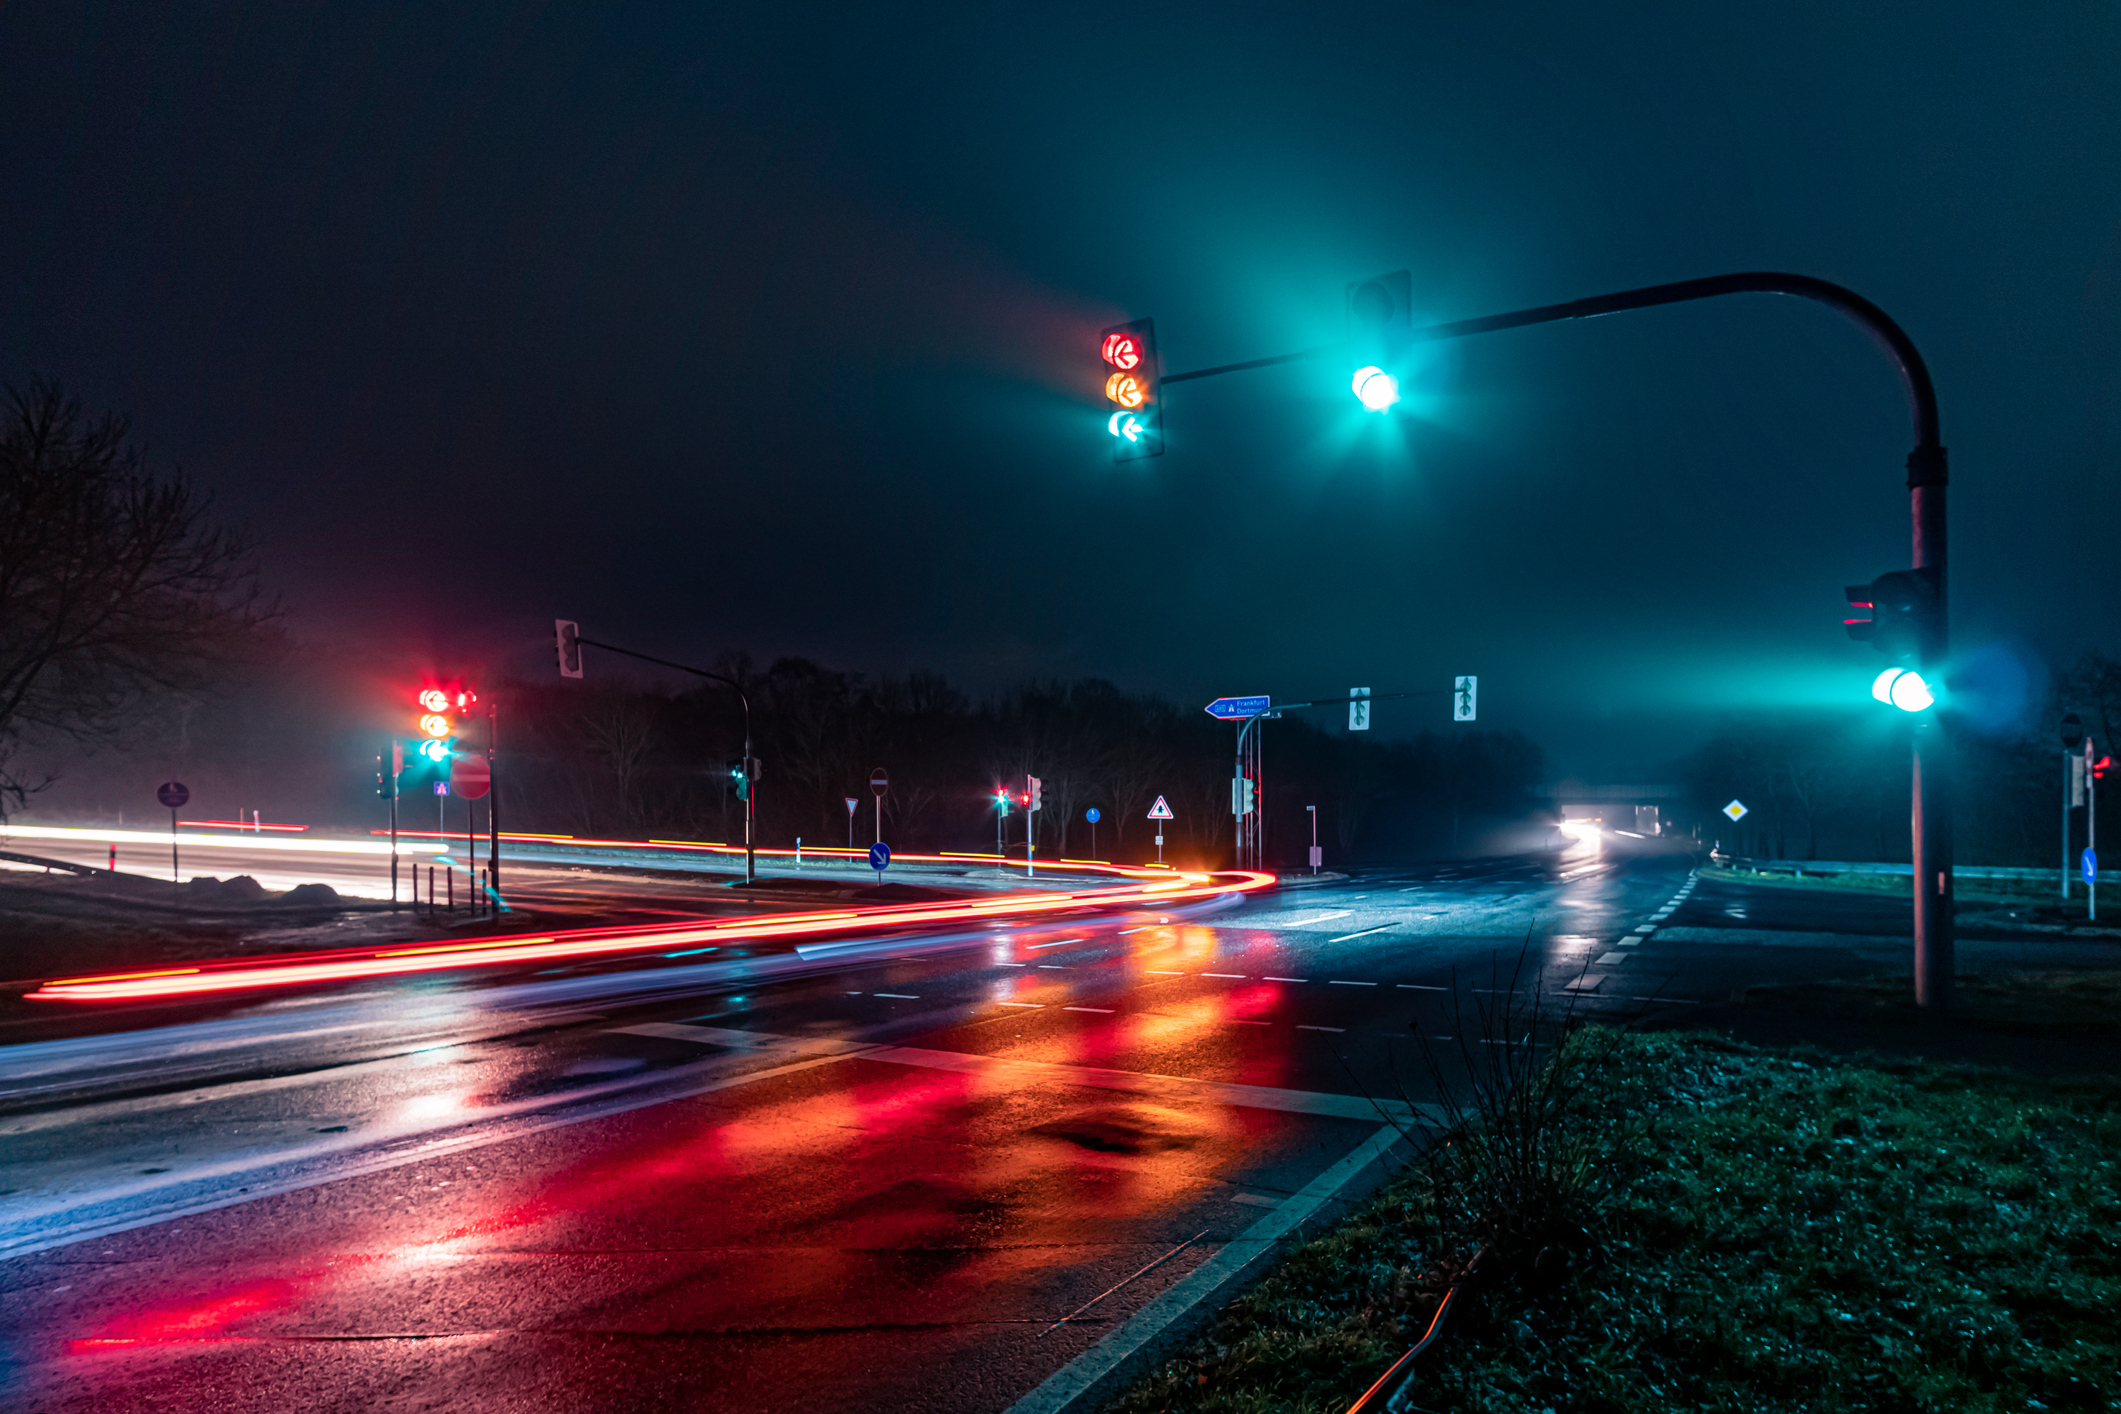 Traffic lights on a misty night with car light trails and reflections on the wet road